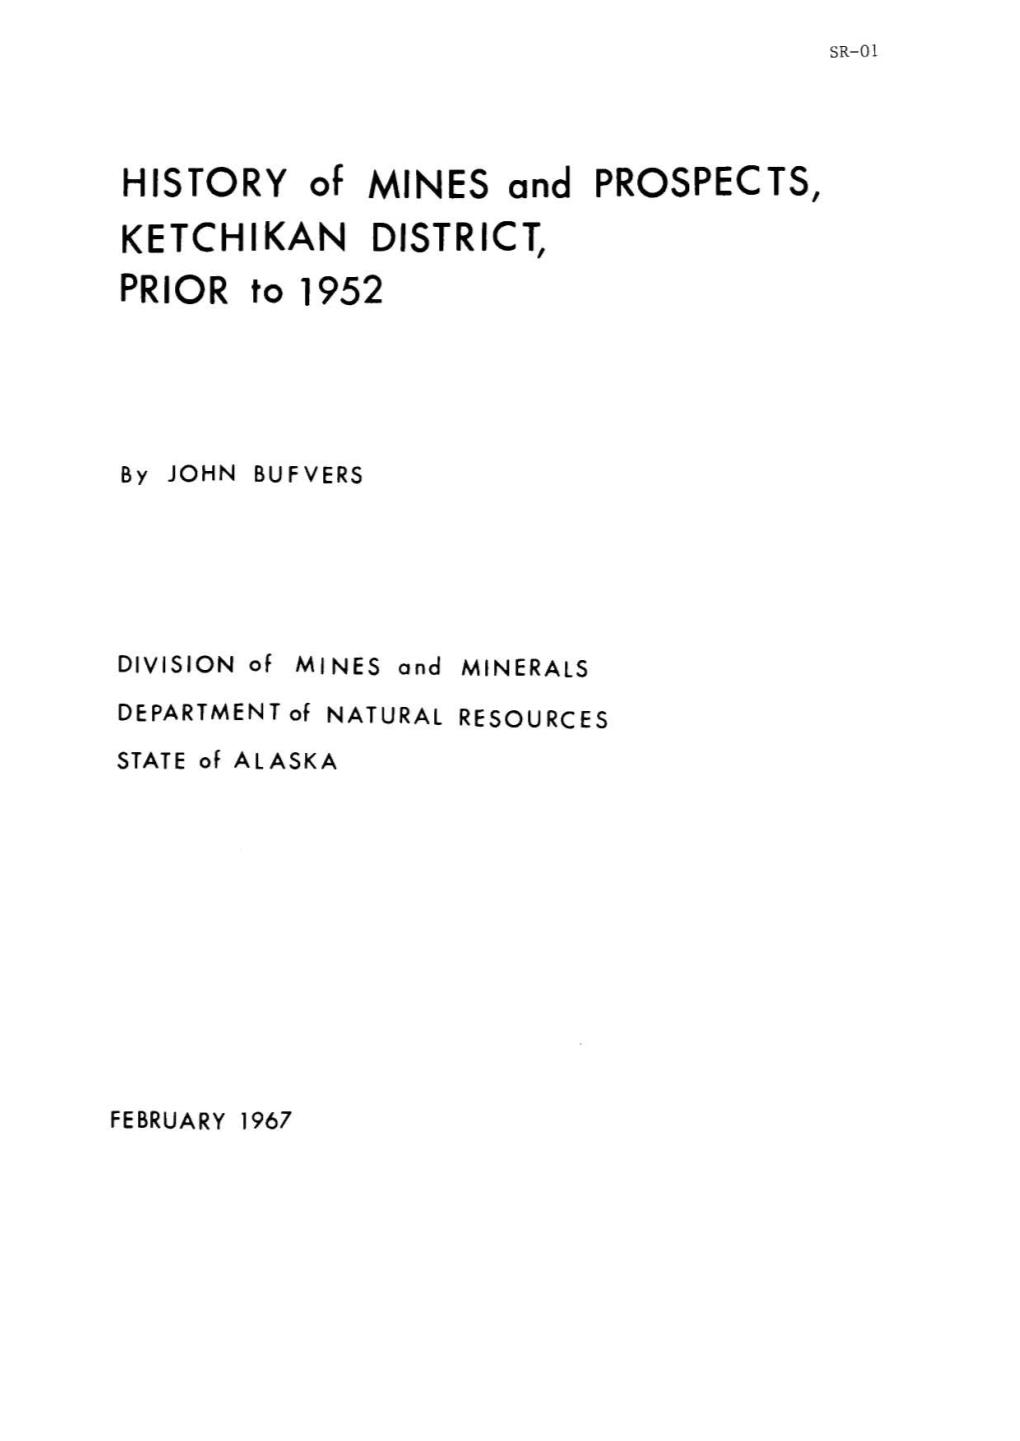 HISTORY of MINES and PROSPECTS, KETCHIKAN DISTRICT, PRIOR to 1952